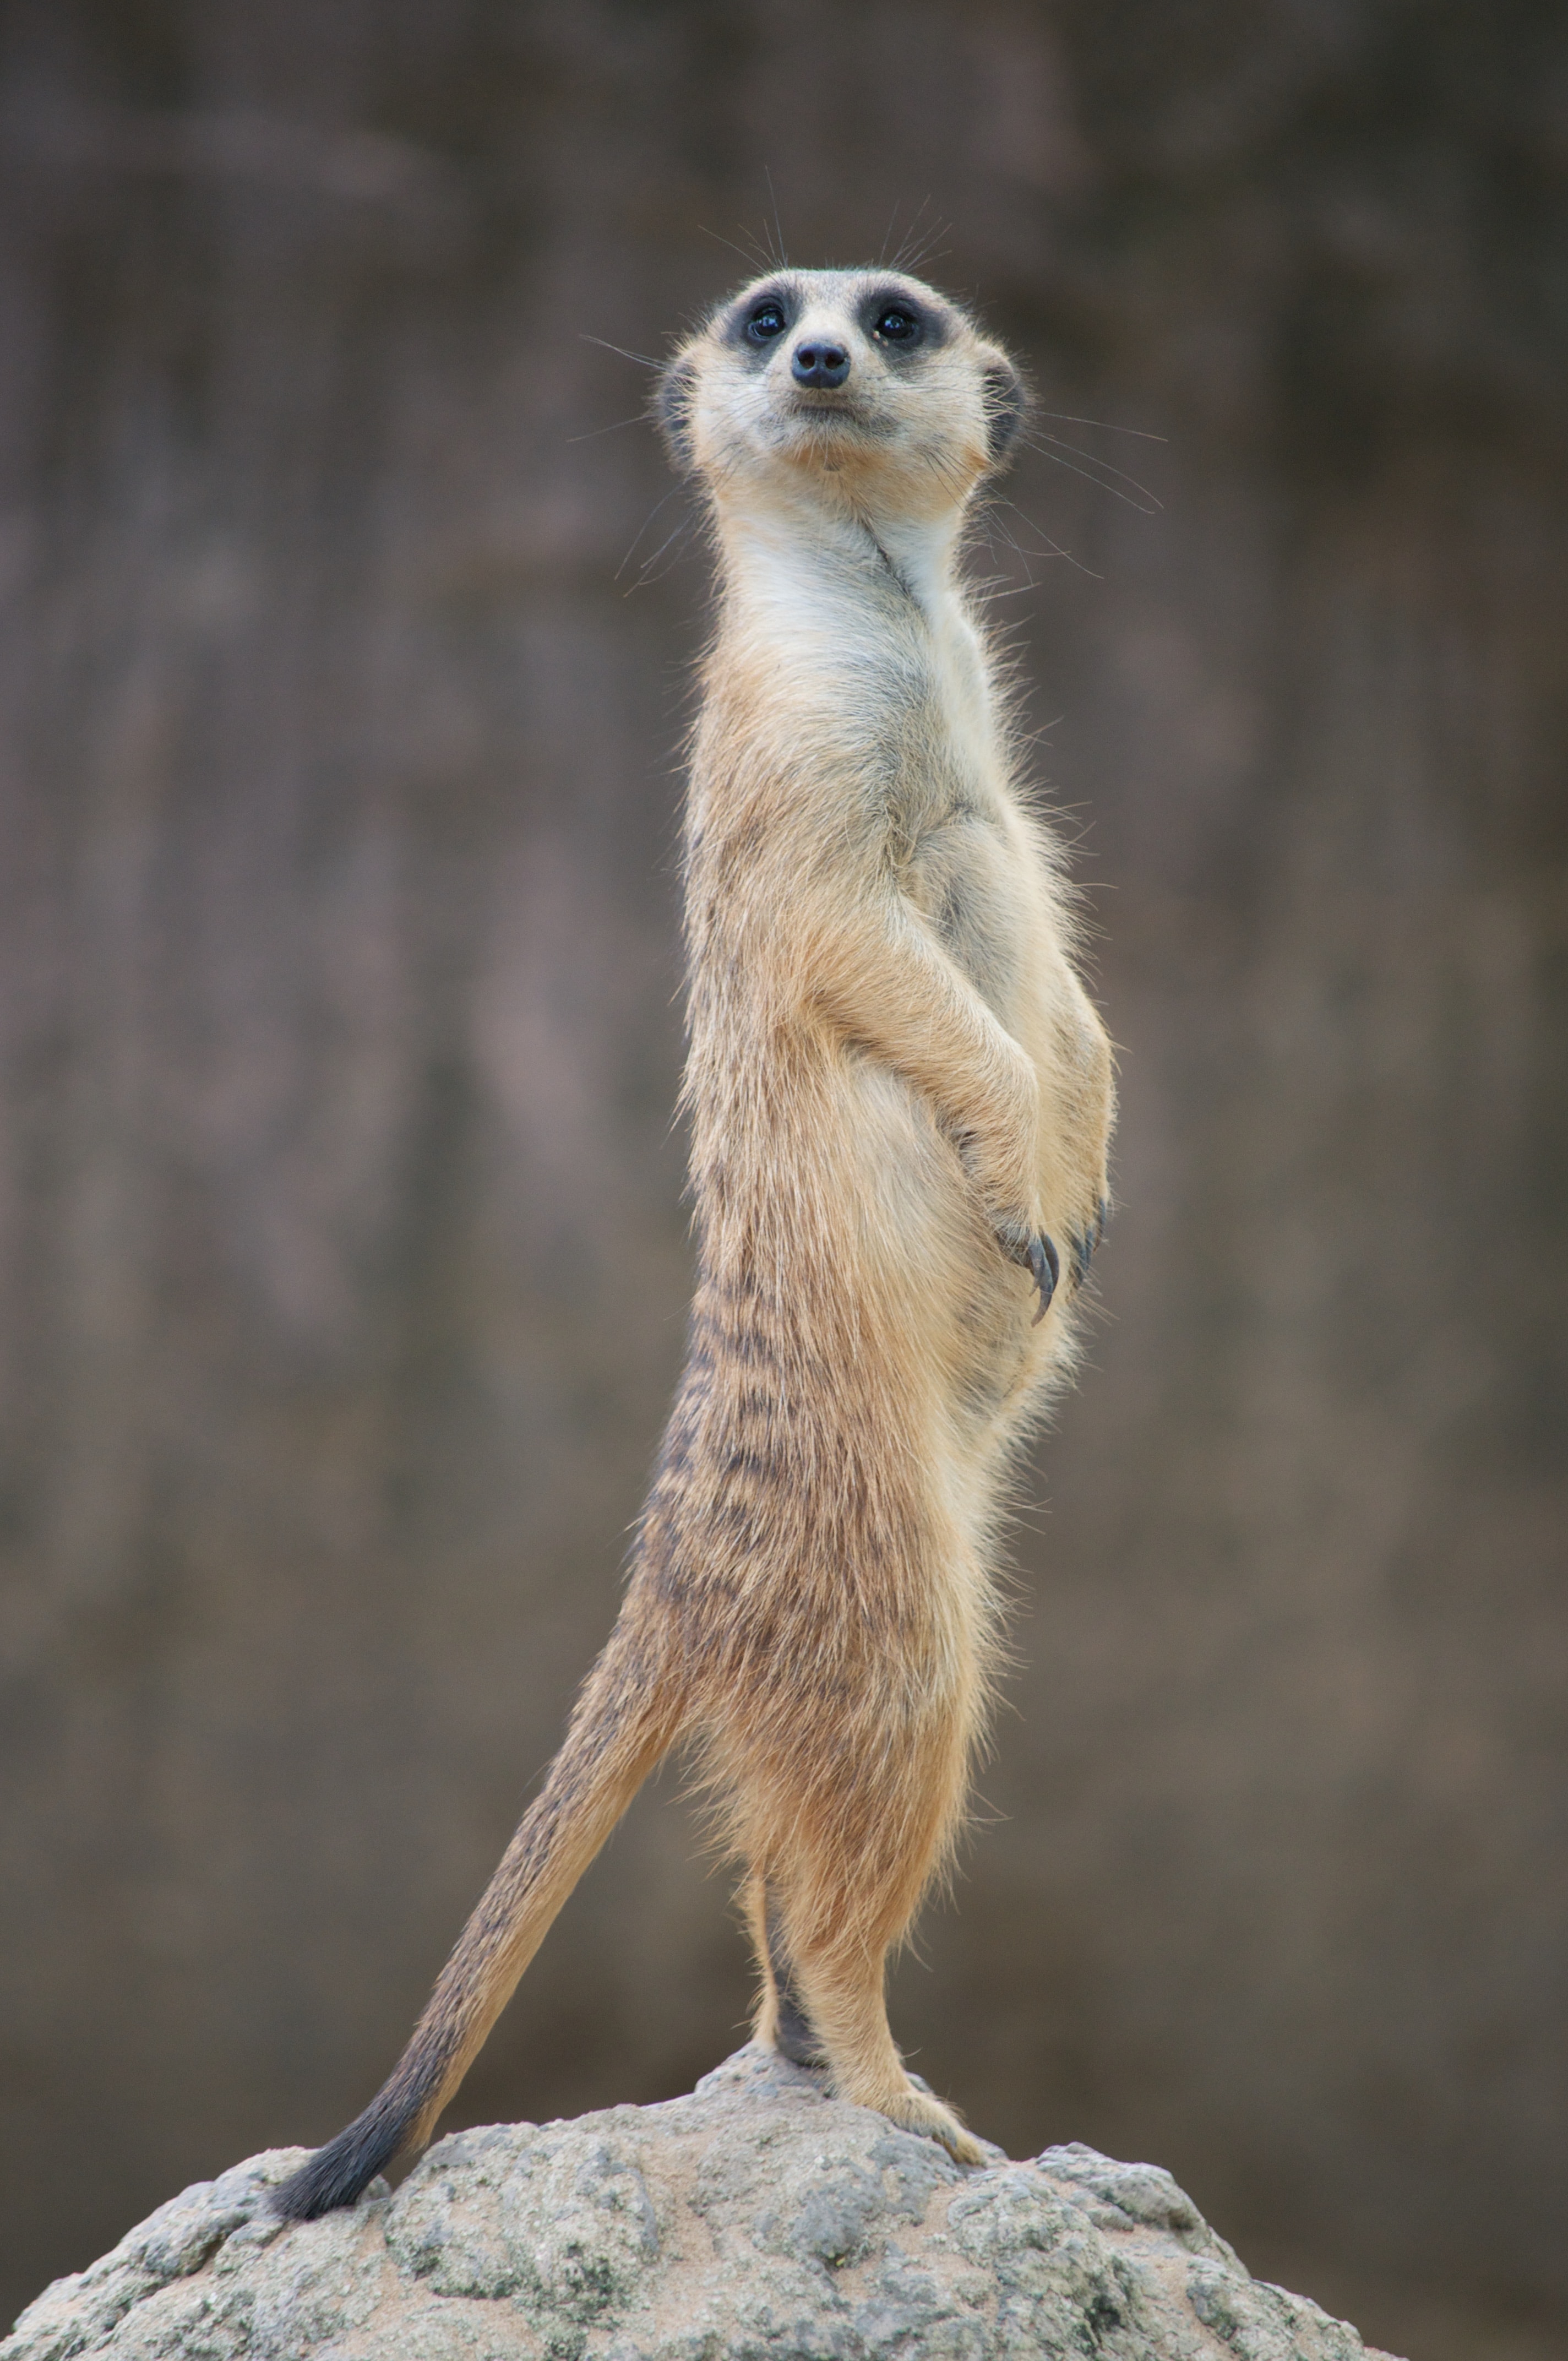 A meerkat standing up straight with its head turned to the right looking at the camera.